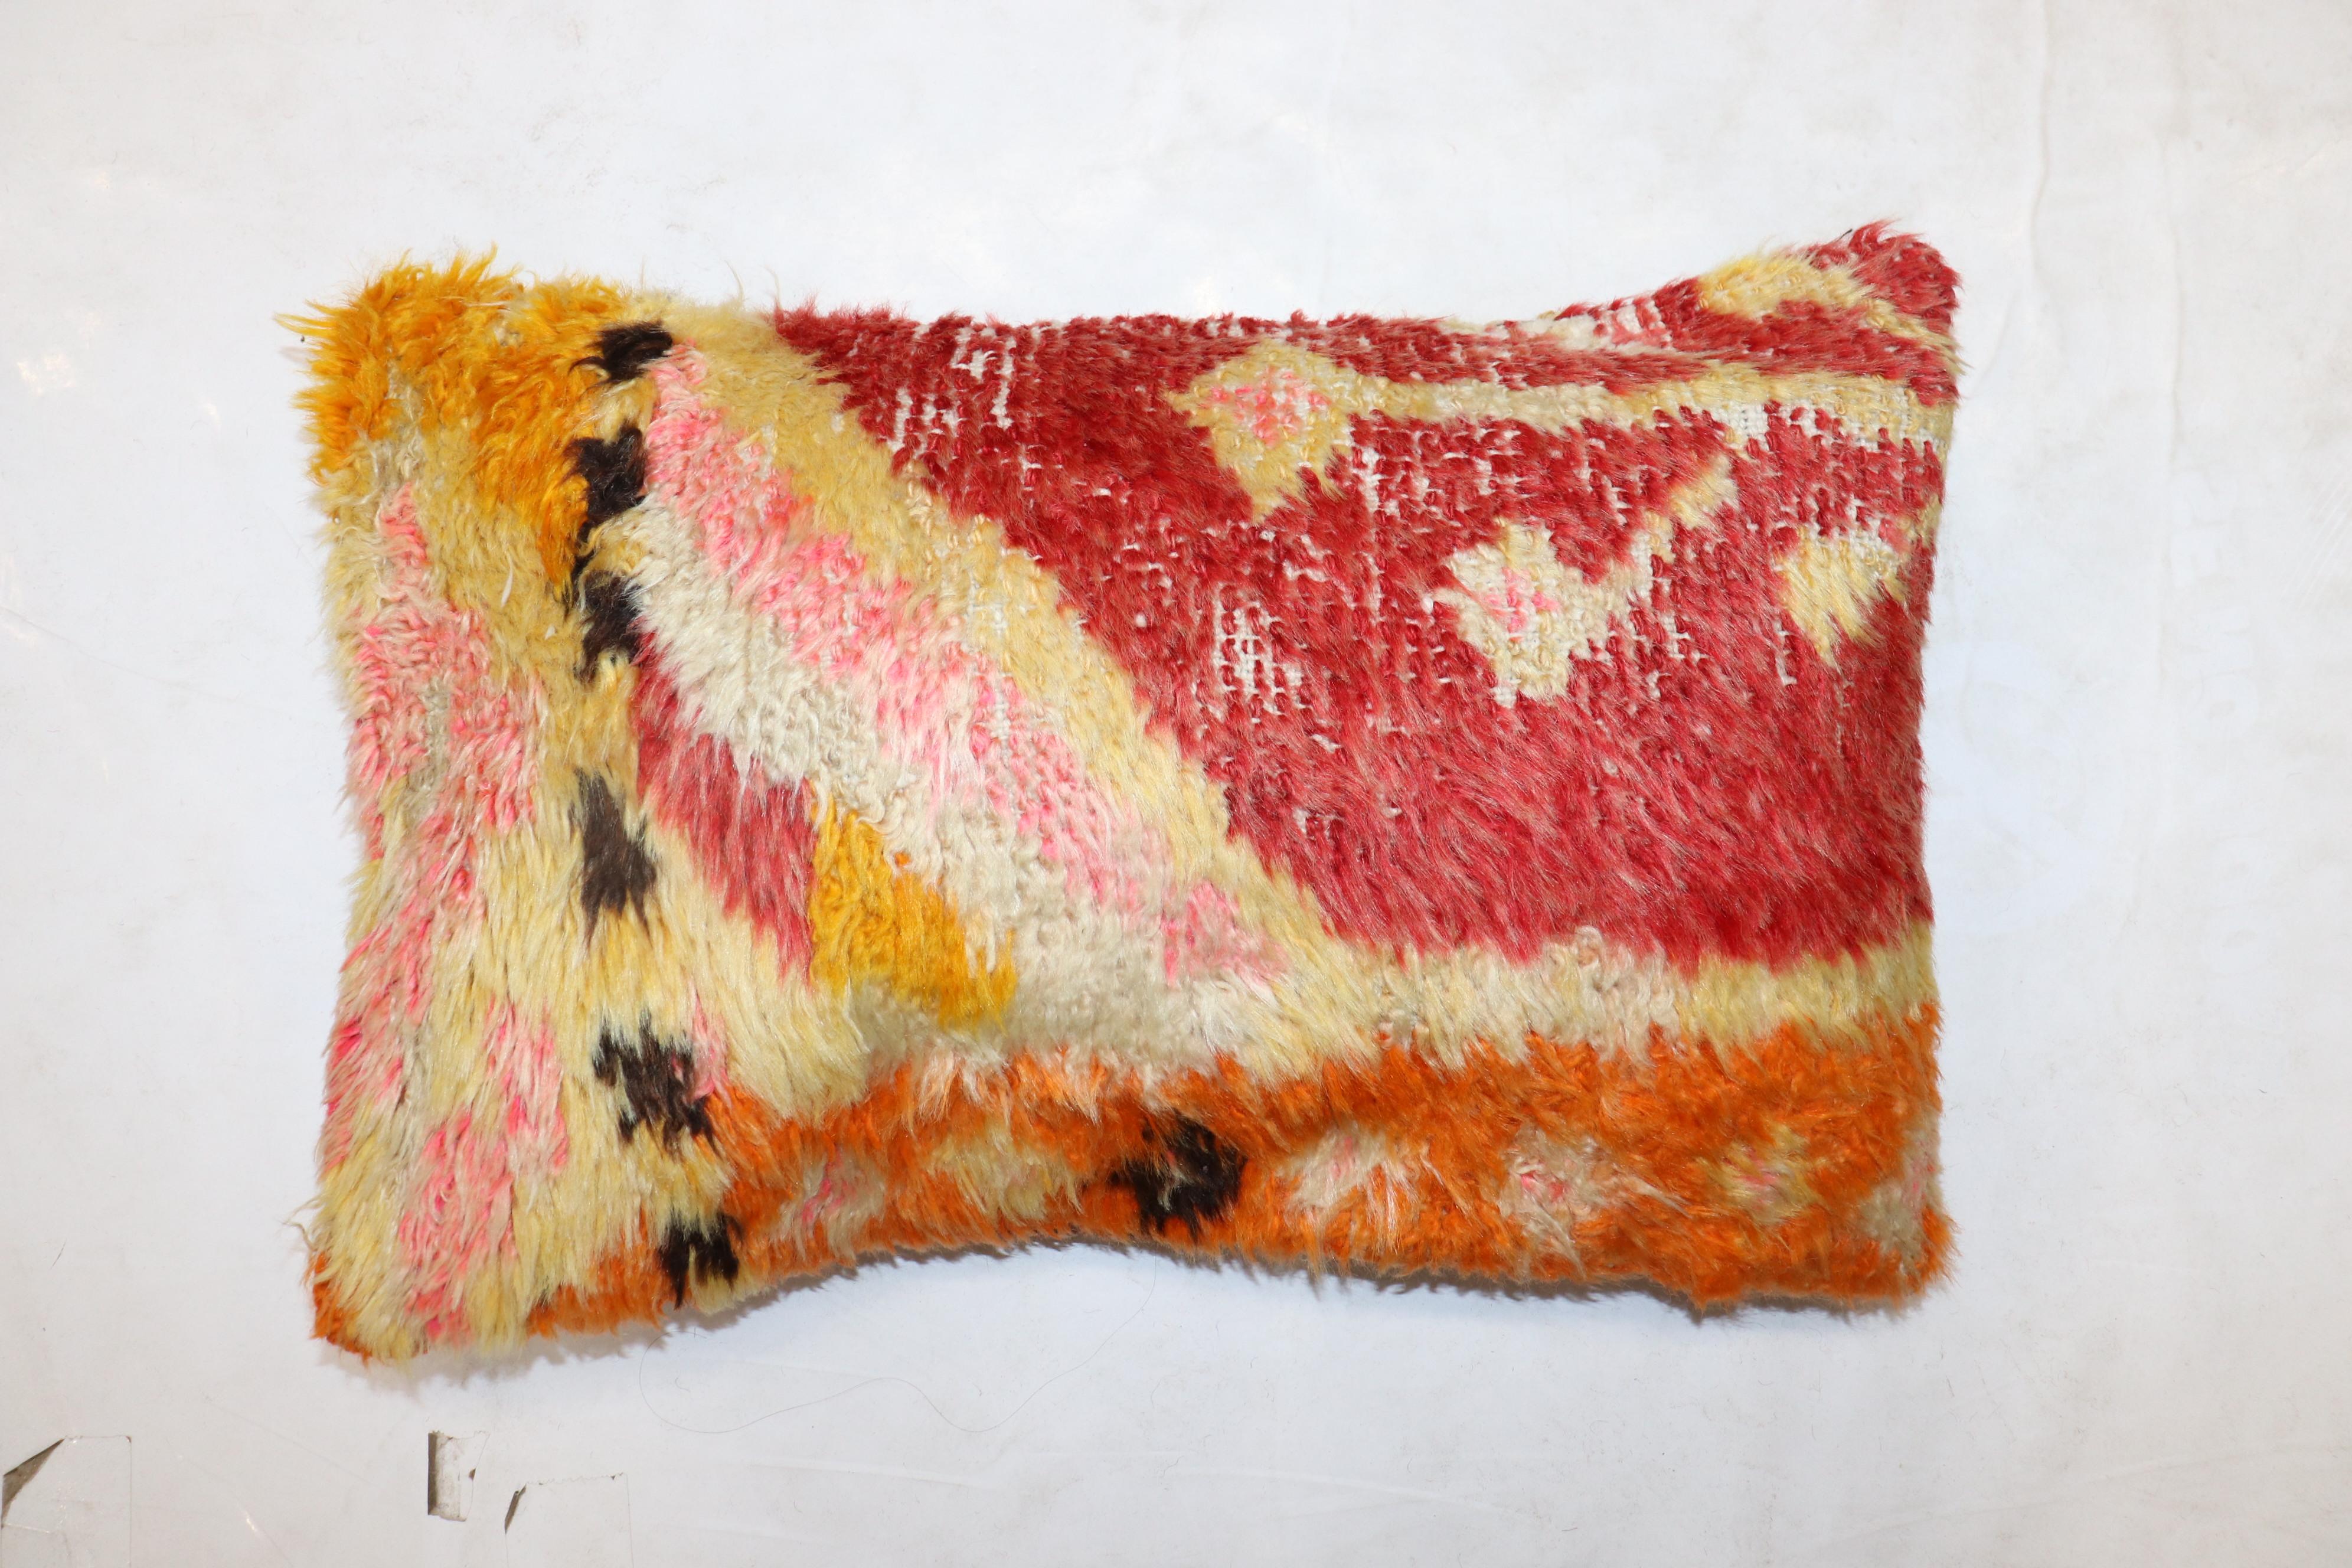 Bolster size Pillow made from a mid 20th century Turkish Tulu rug. PolyFill insert and zipper closure provided.

Measures: 14'' x 22''.